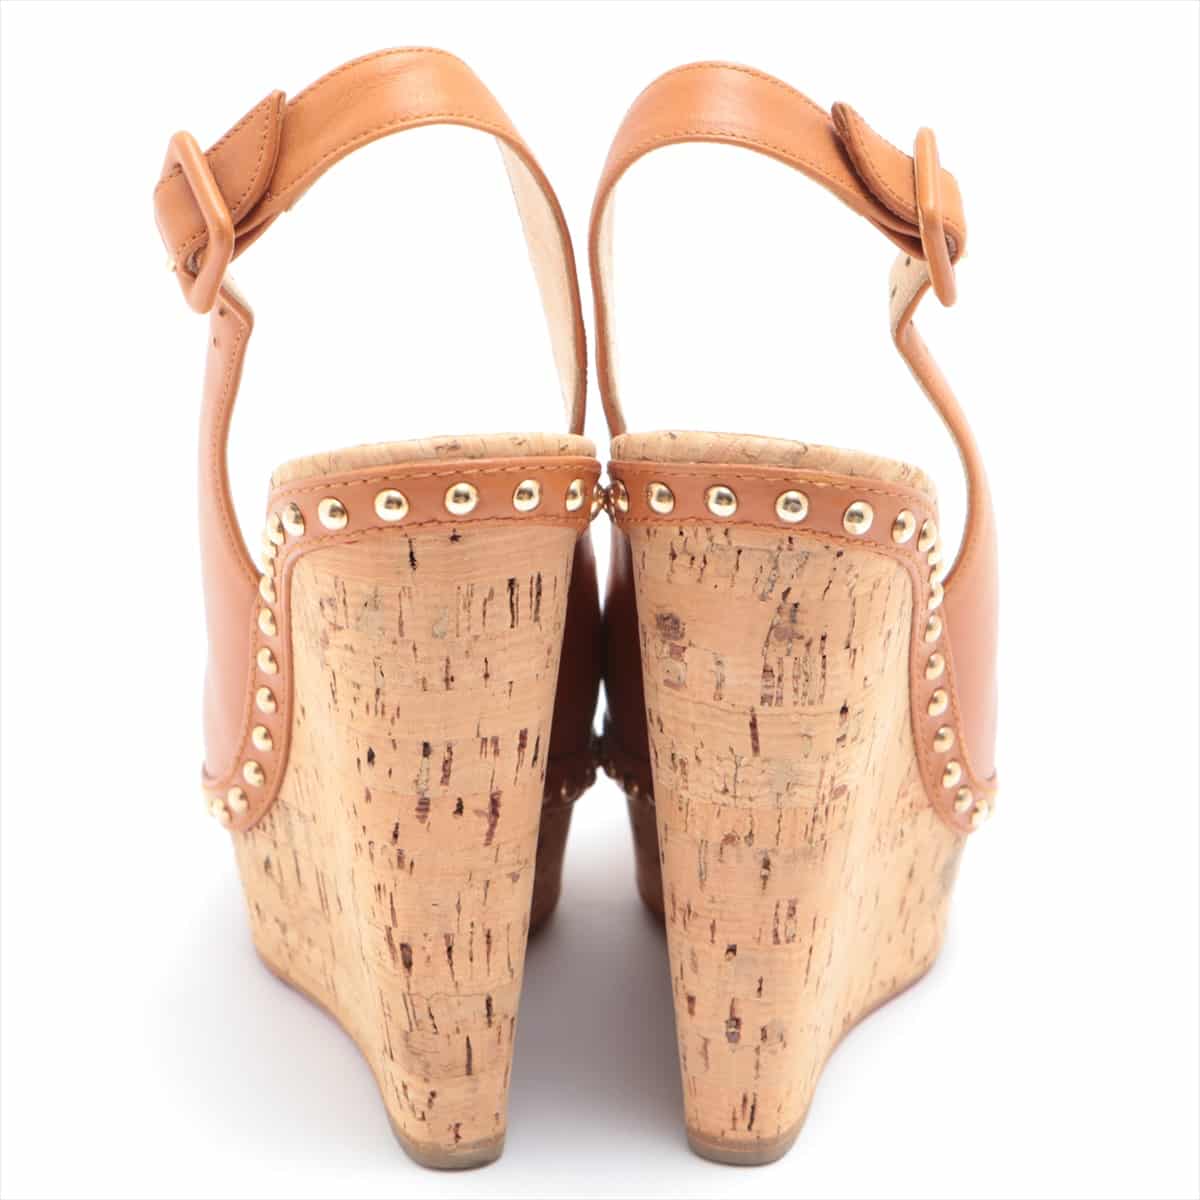 Christian Louboutin Leather Wedge Sole Sandals 37 Ladies' Camel There is a half rubber sole